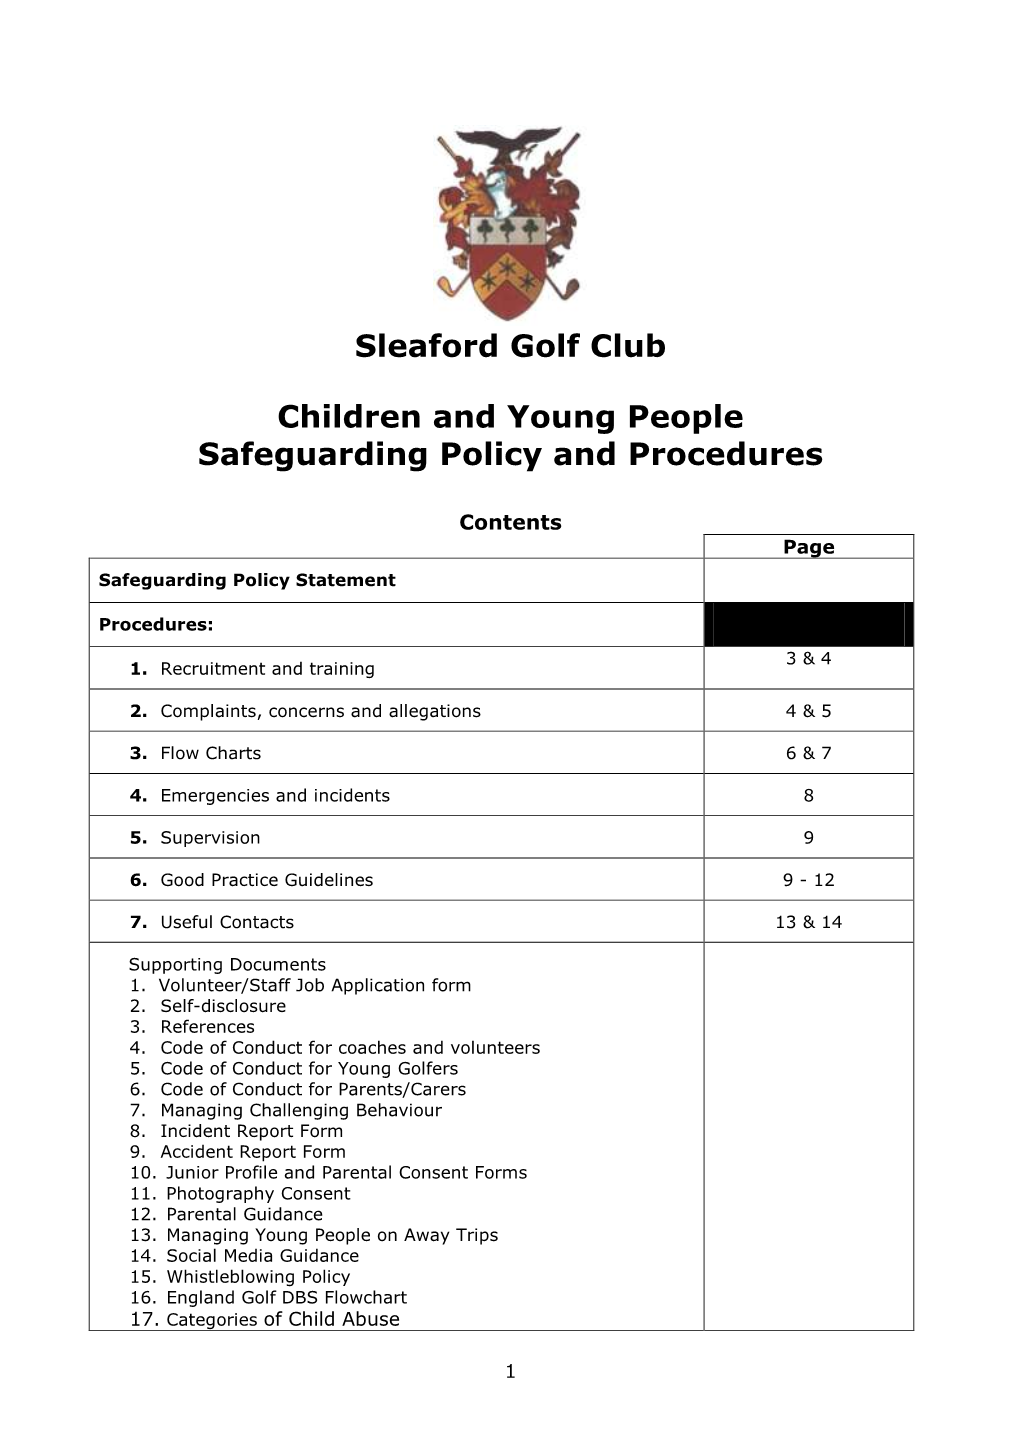 Sleaford Golf Club Children and Young People Safeguarding Policy